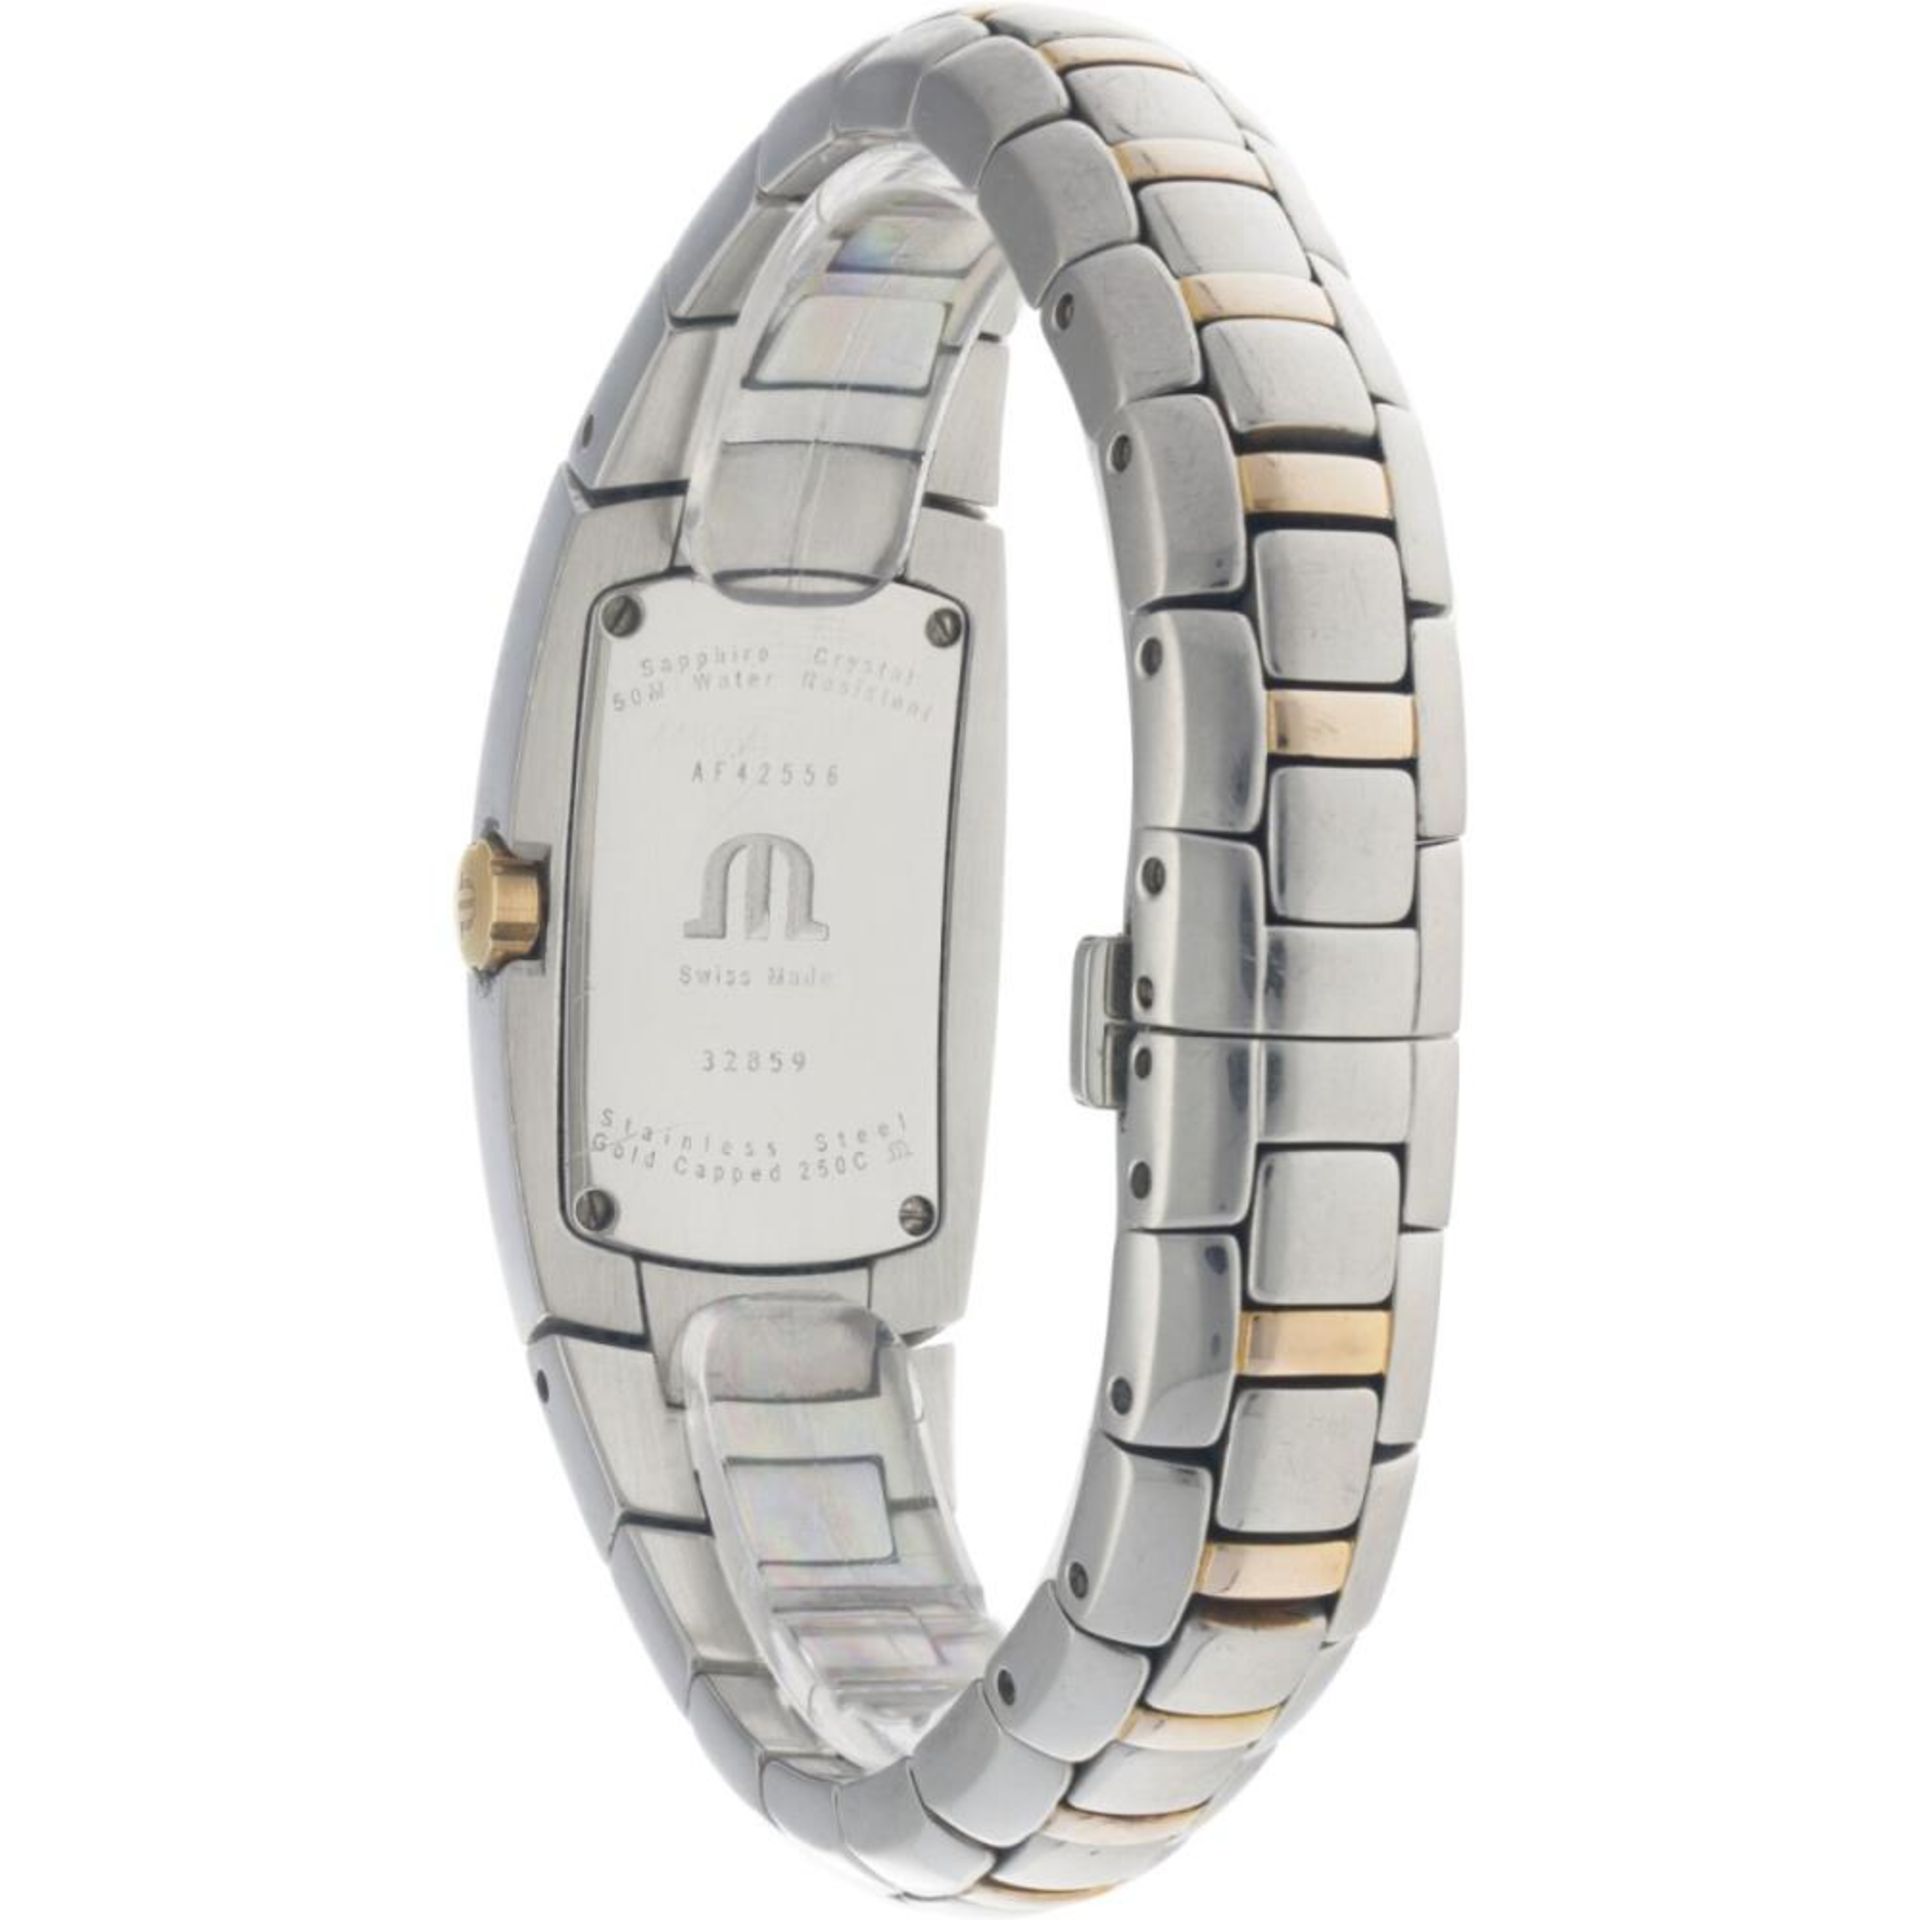 Maurice Lacroix Intuition 32859 - Ladies watch - approx. 2010. - Image 3 of 5